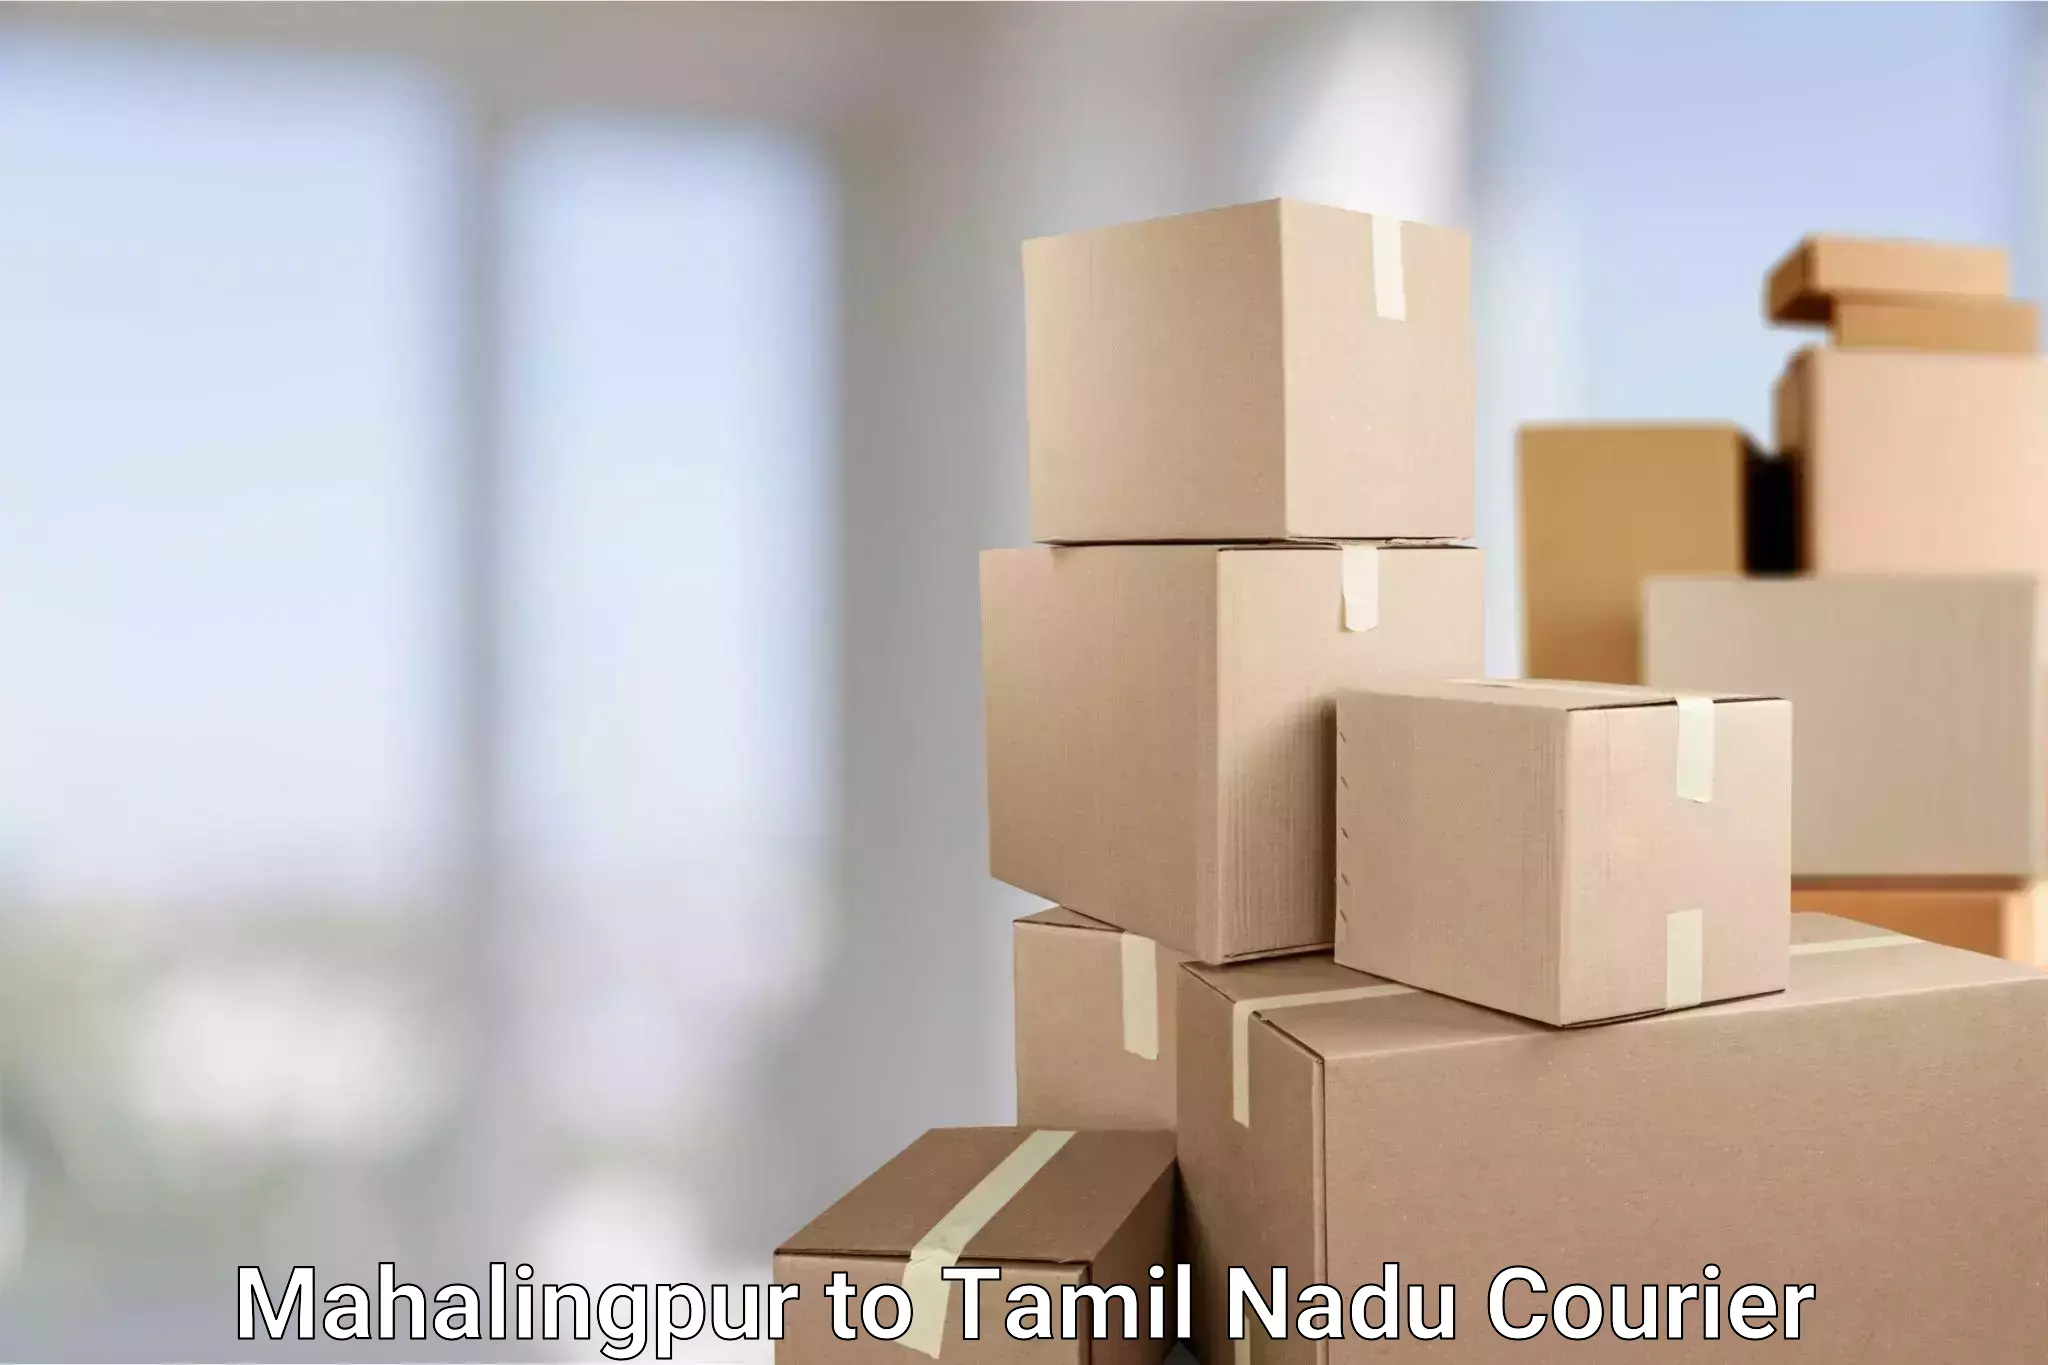 Express delivery capabilities Mahalingpur to Ennore Port Chennai